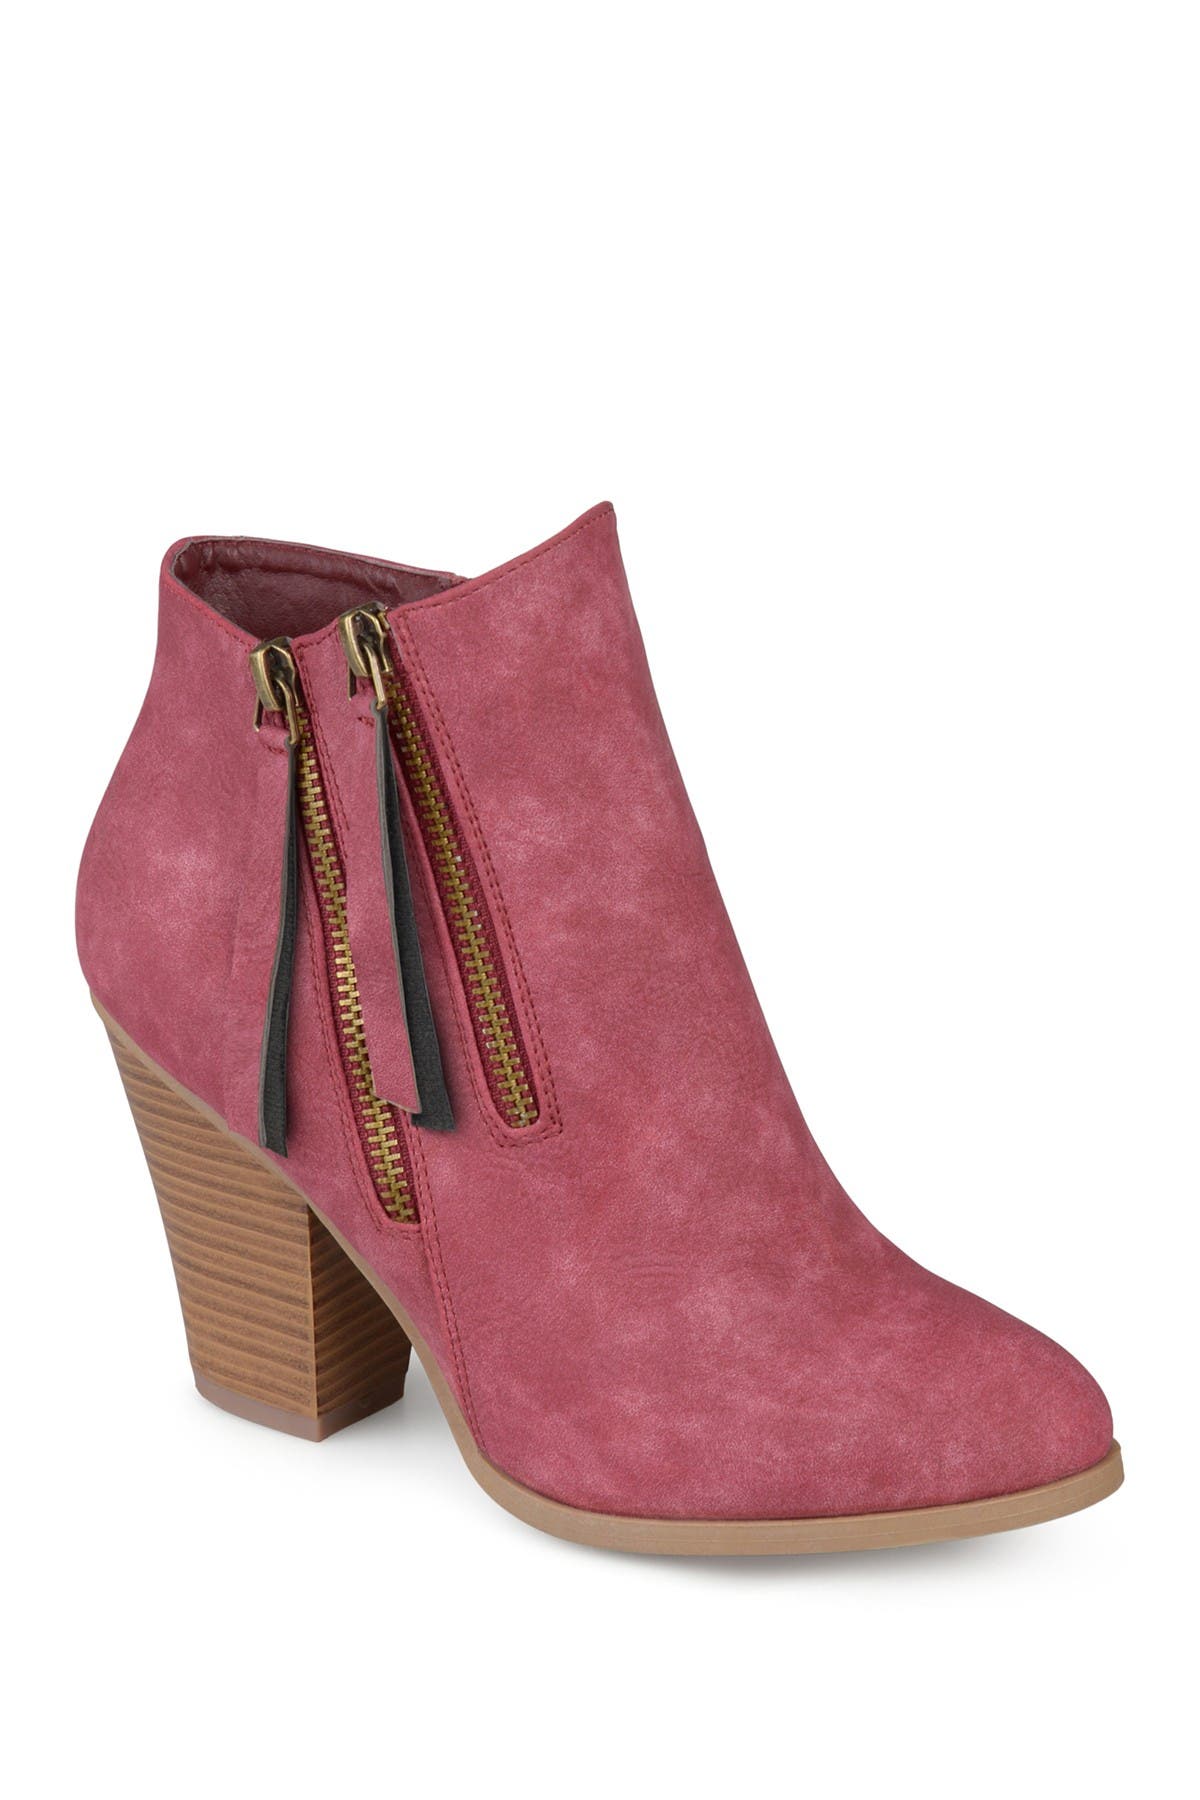 JOURNEE Collection | Vally Bootie 